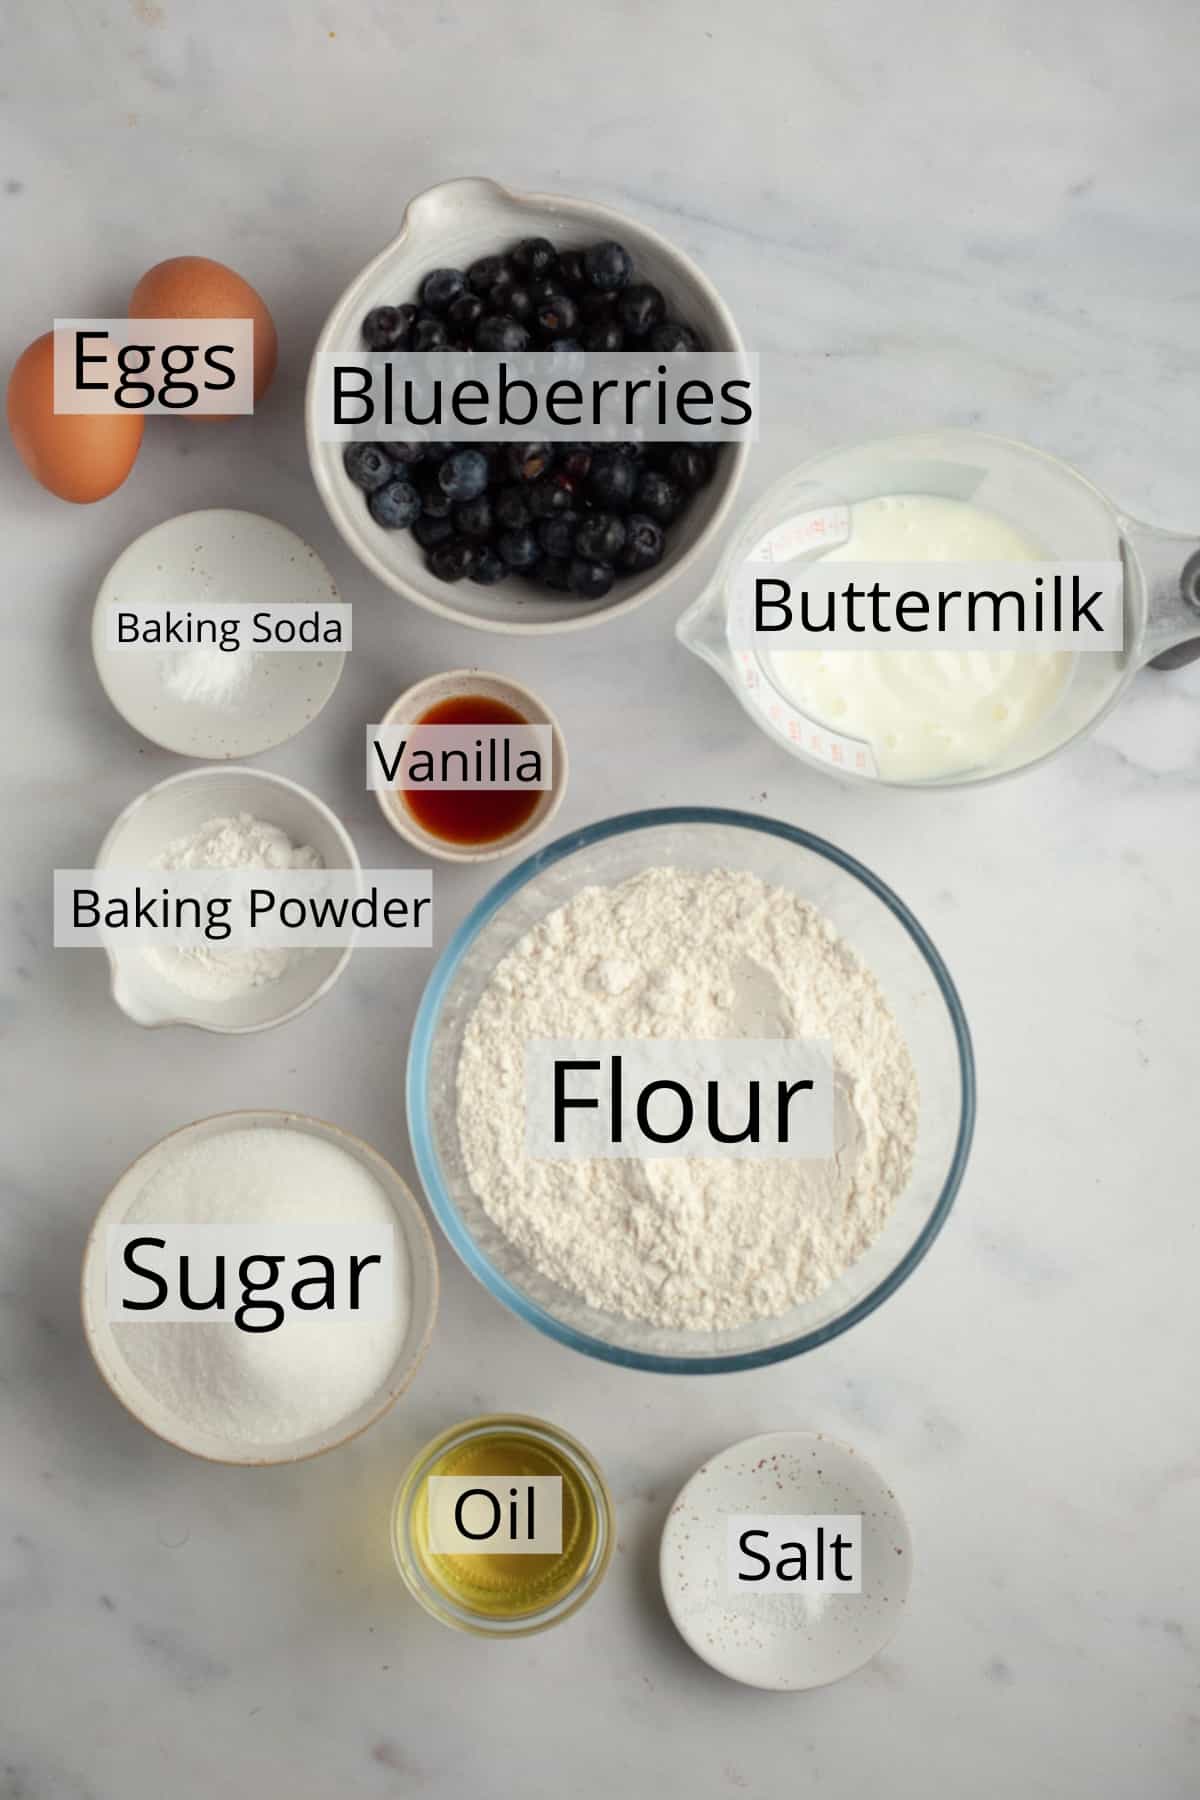 All the ingredients needed to make blueberry muffins, weighed out into small bowls.